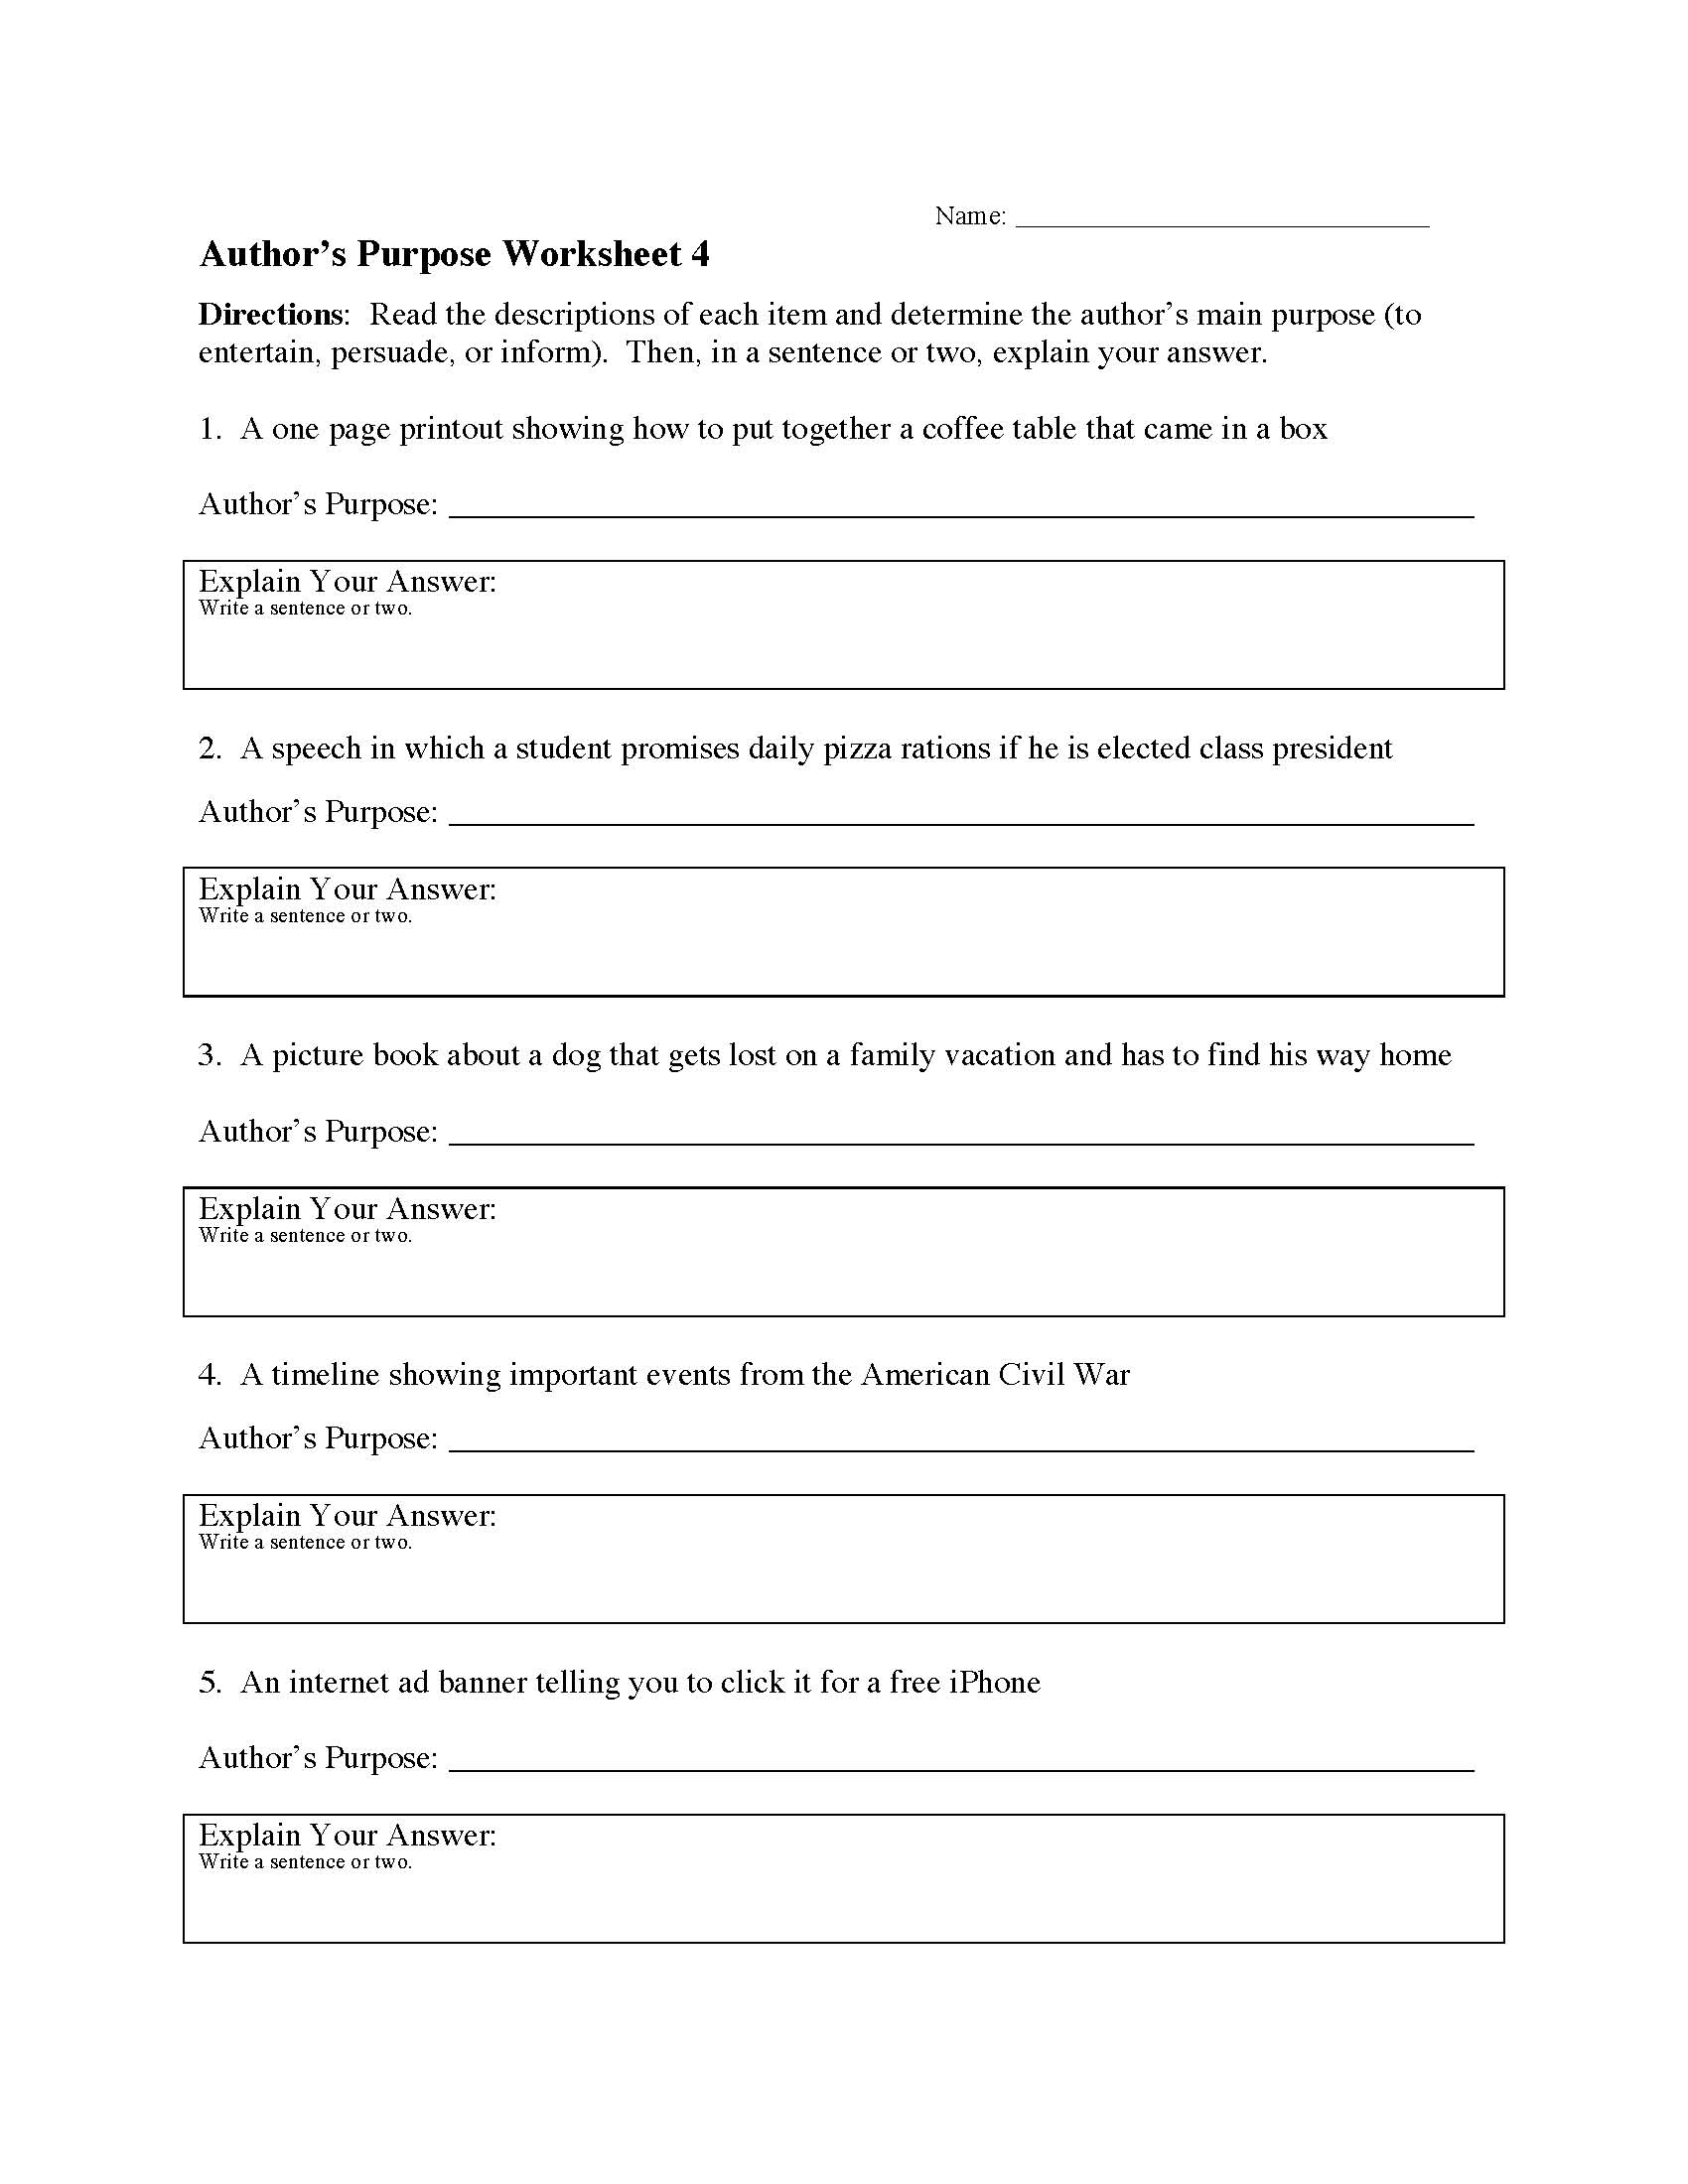 This is a preview image of Author's Purpose Worksheet 4. Click on it to enlarge it or view the source file.